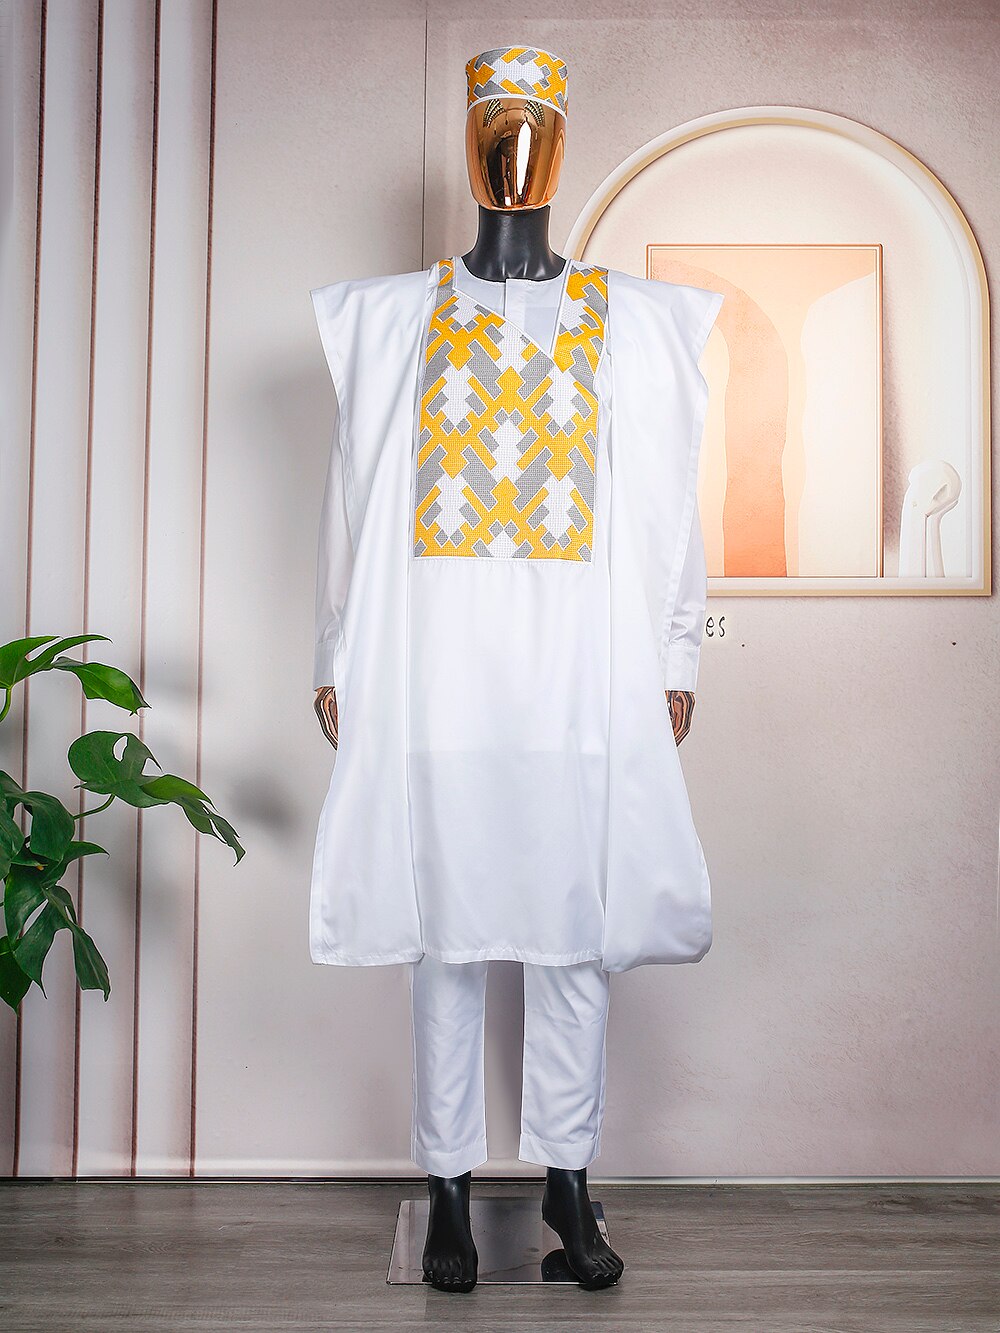 3PC Embroidered Set with Full Dress, Coat, Pants, Shirt, Robe, and Hat - Flexi Africa - Flexi Africa offers Free Delivery Worldwide - Vibrant African traditional clothing showcasing bold prints and intricate designs